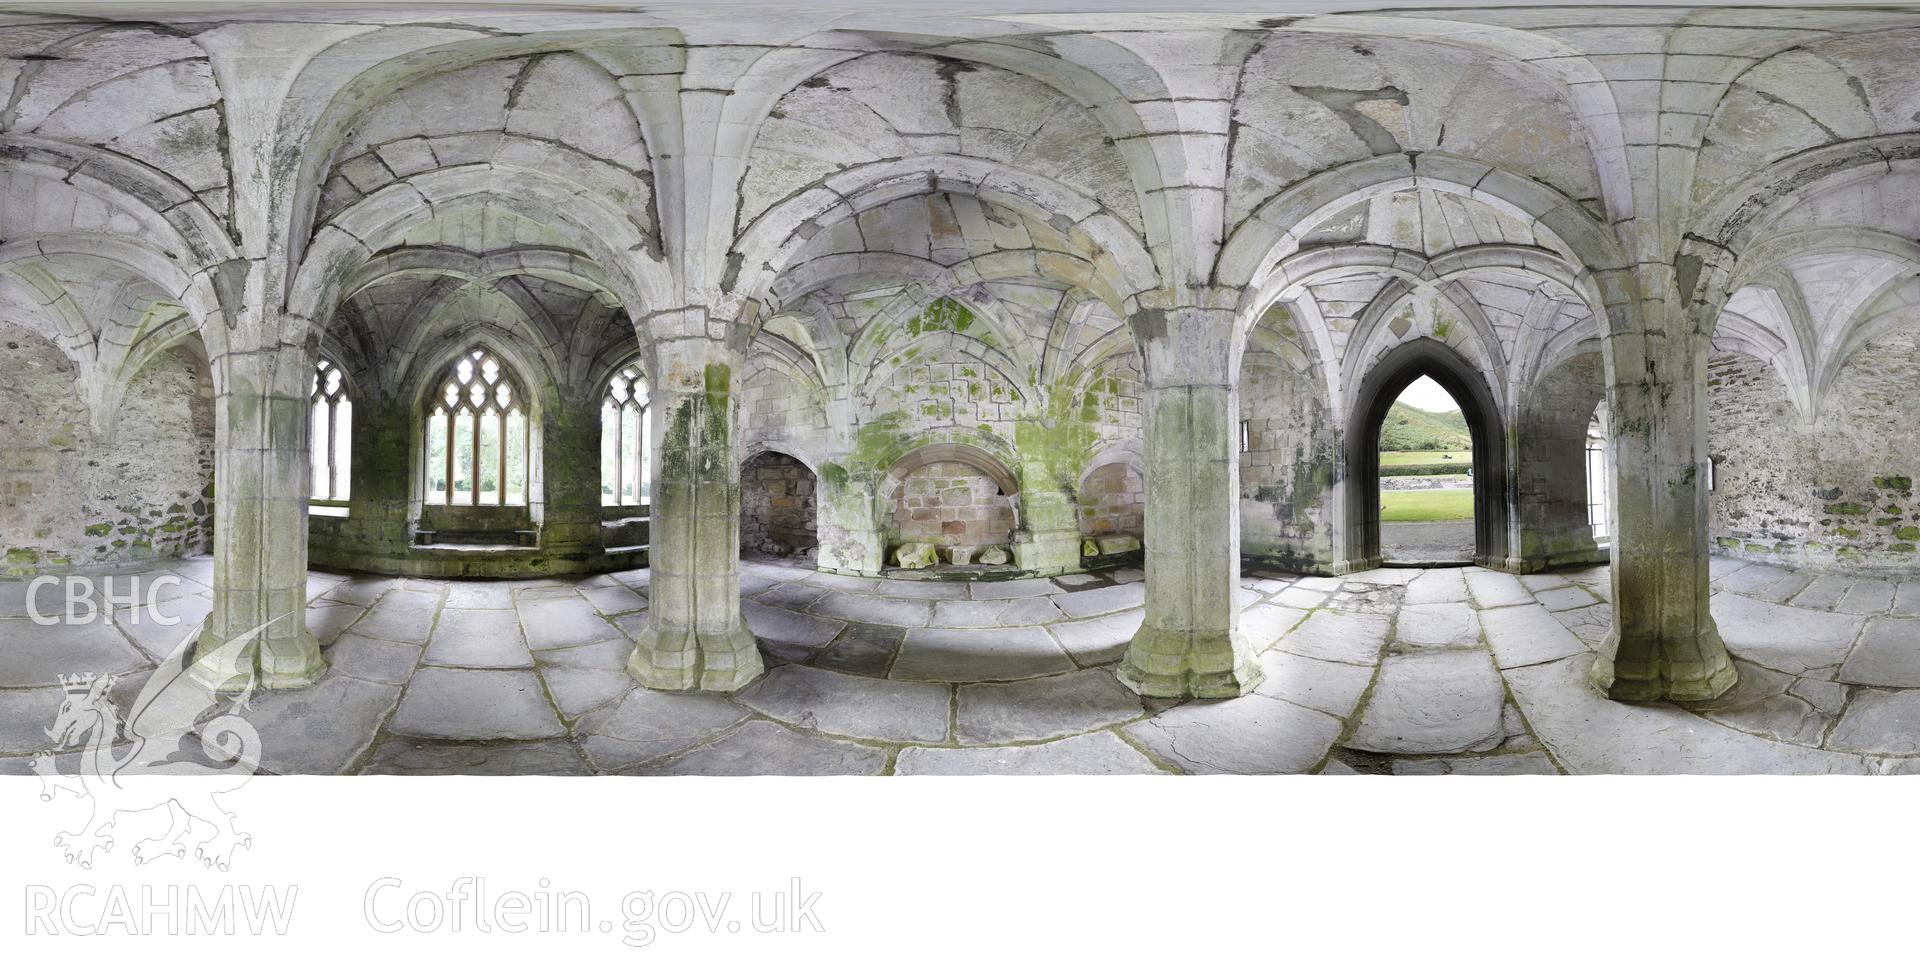 Reduced resolution .tiff file of stitched images in the Chapter House at Valle Crucis Abbey, carried out by Sue Fielding and Rita Singer, July 2017. Produced through European Travellers to Wales project.